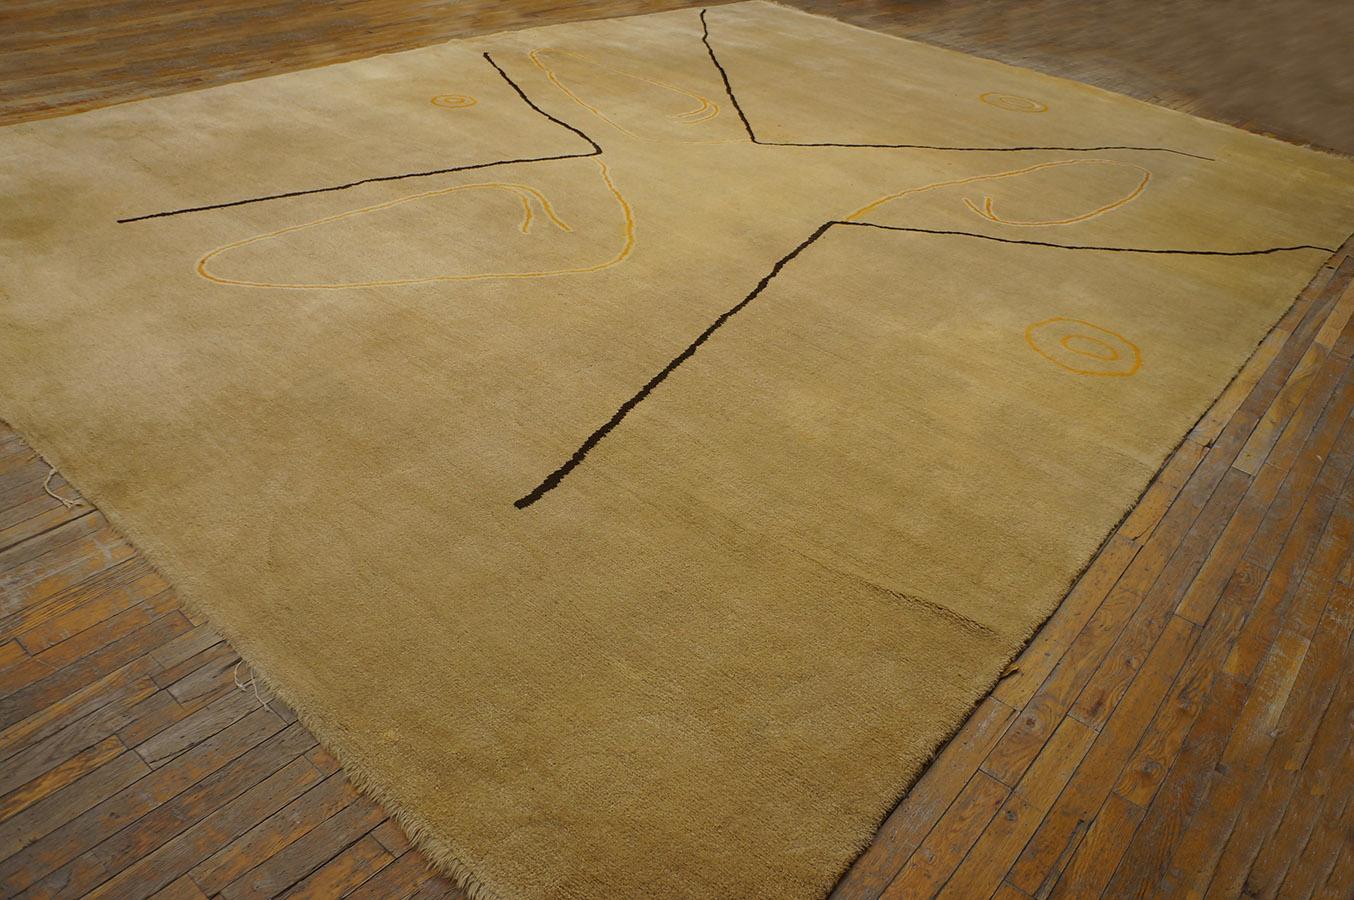 Ecuadorian Carpet
Designed by Olga Fisch
Quito, Ecuador
Middle 20th century, c. 1960
Symmetrically knotted wool pile on a wool foundation.
The “Nazca Lines” are ancient Peruvian, but they have inspired the drawing on this Moderne New World carpet.